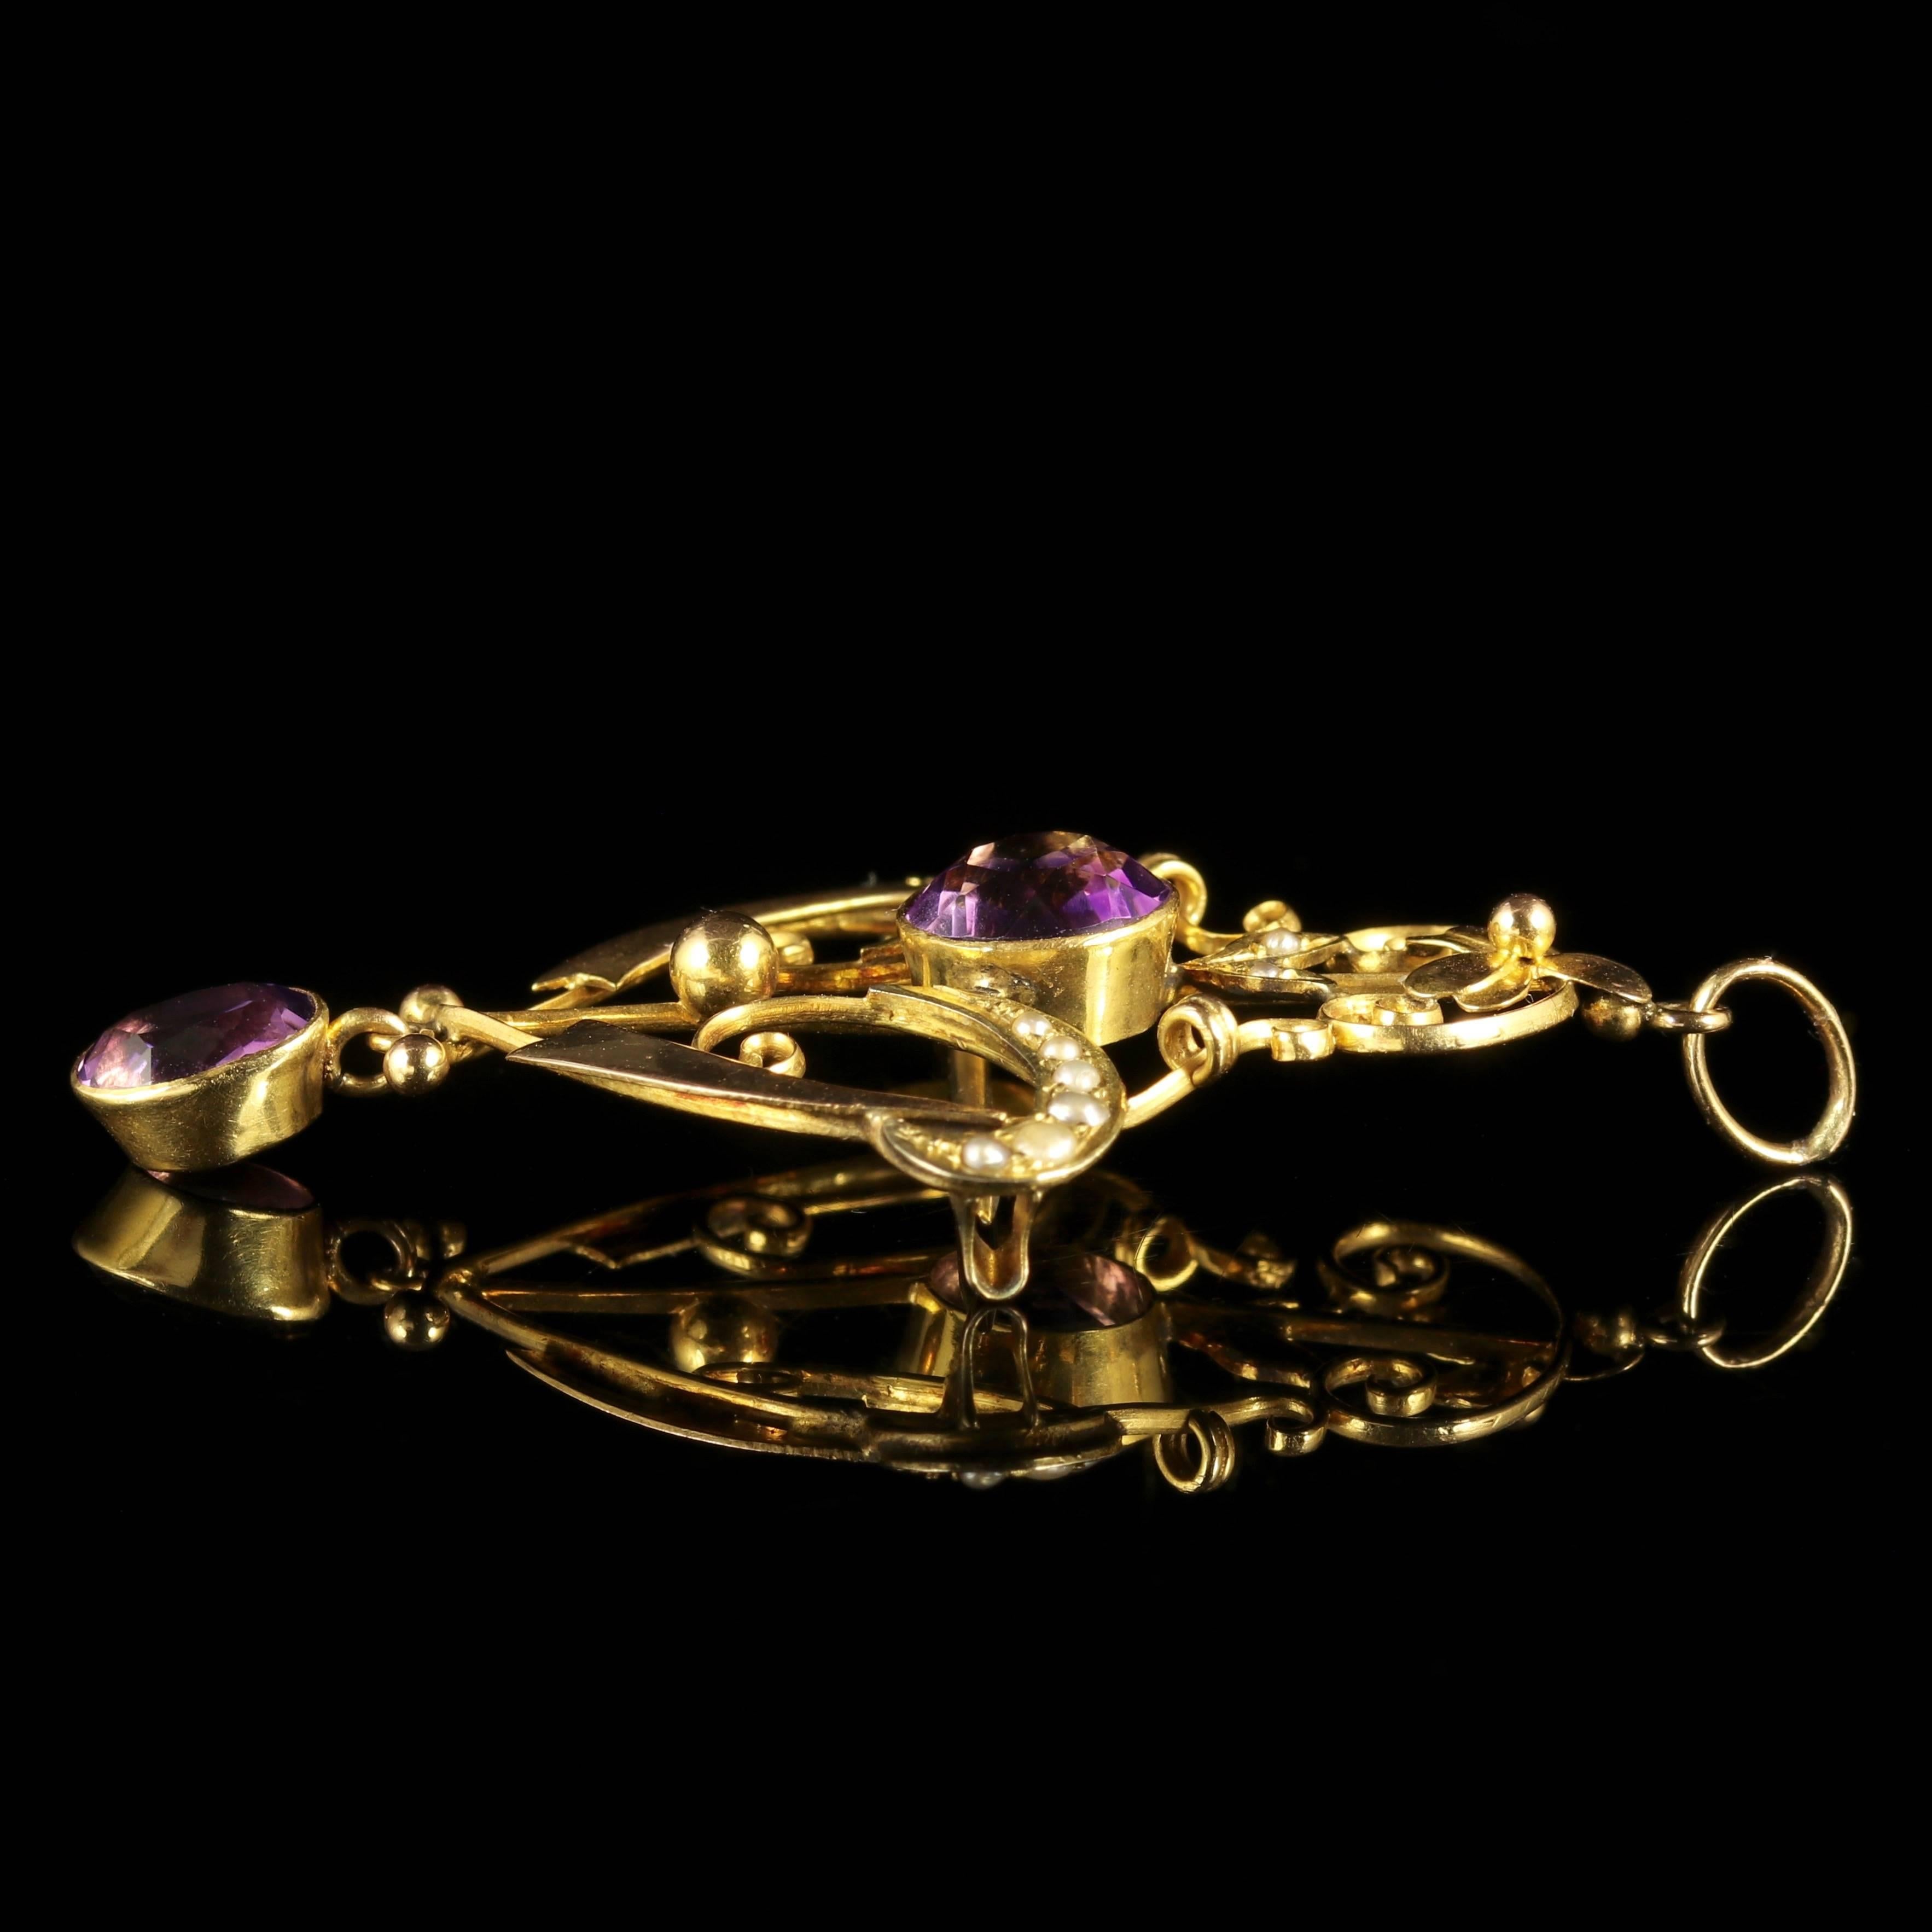 Antique Amethyst Pearl Gold Pendant Brooch, circa 1880 For Sale 1